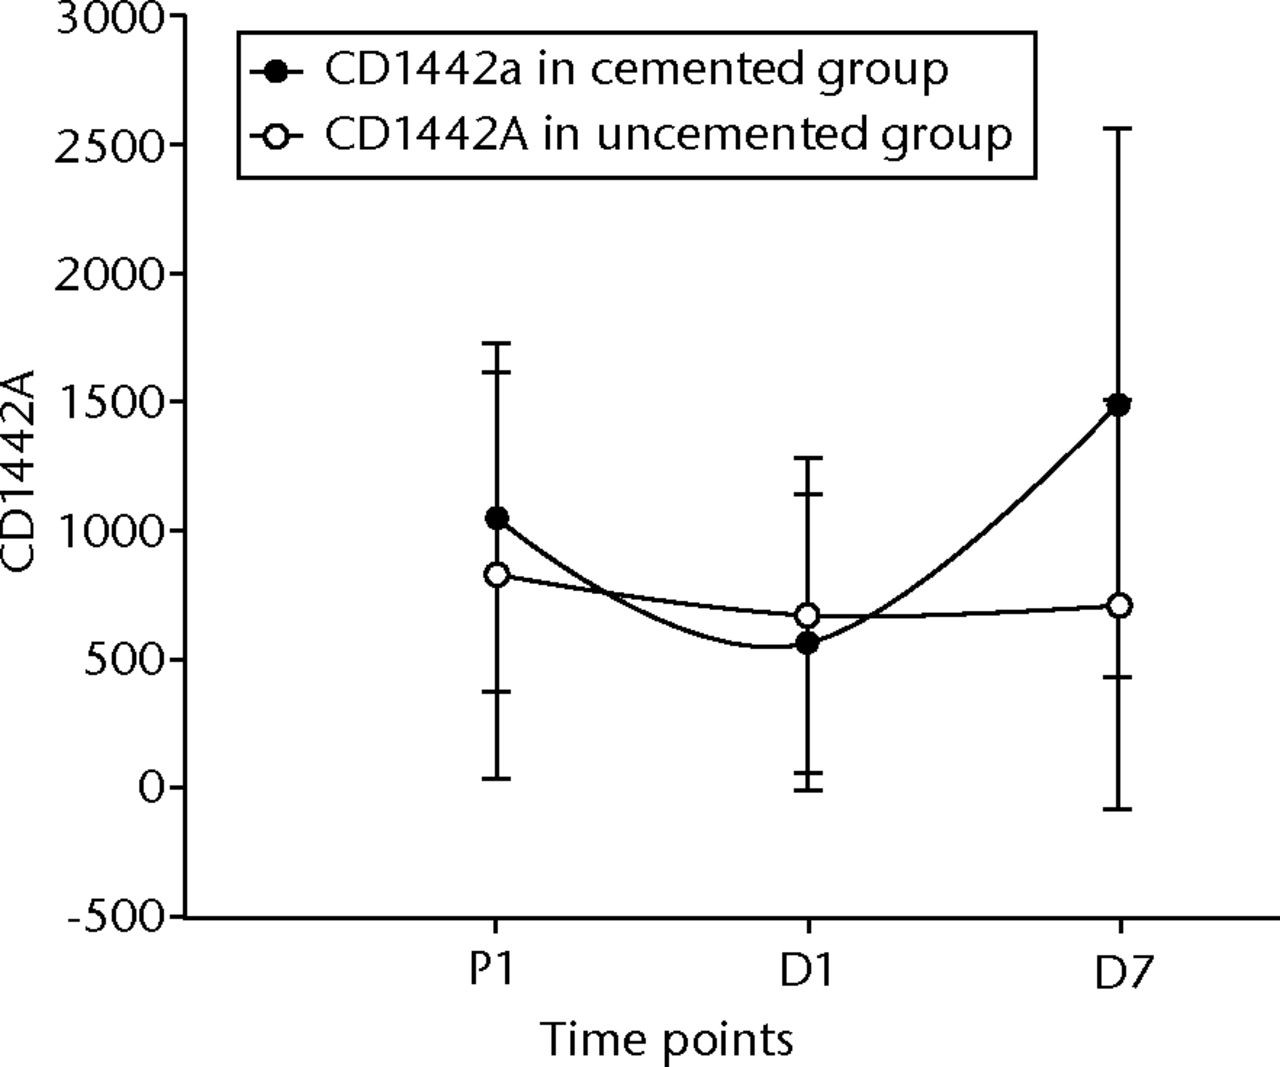 Fig. 10 
            Graph of changes in CD14/42a counts
over the three time points (median and interquartile ranges) in
the cemented total knee replacement (TKR) group (n = 19) against
the uncemented TKR group (n = 19)
          